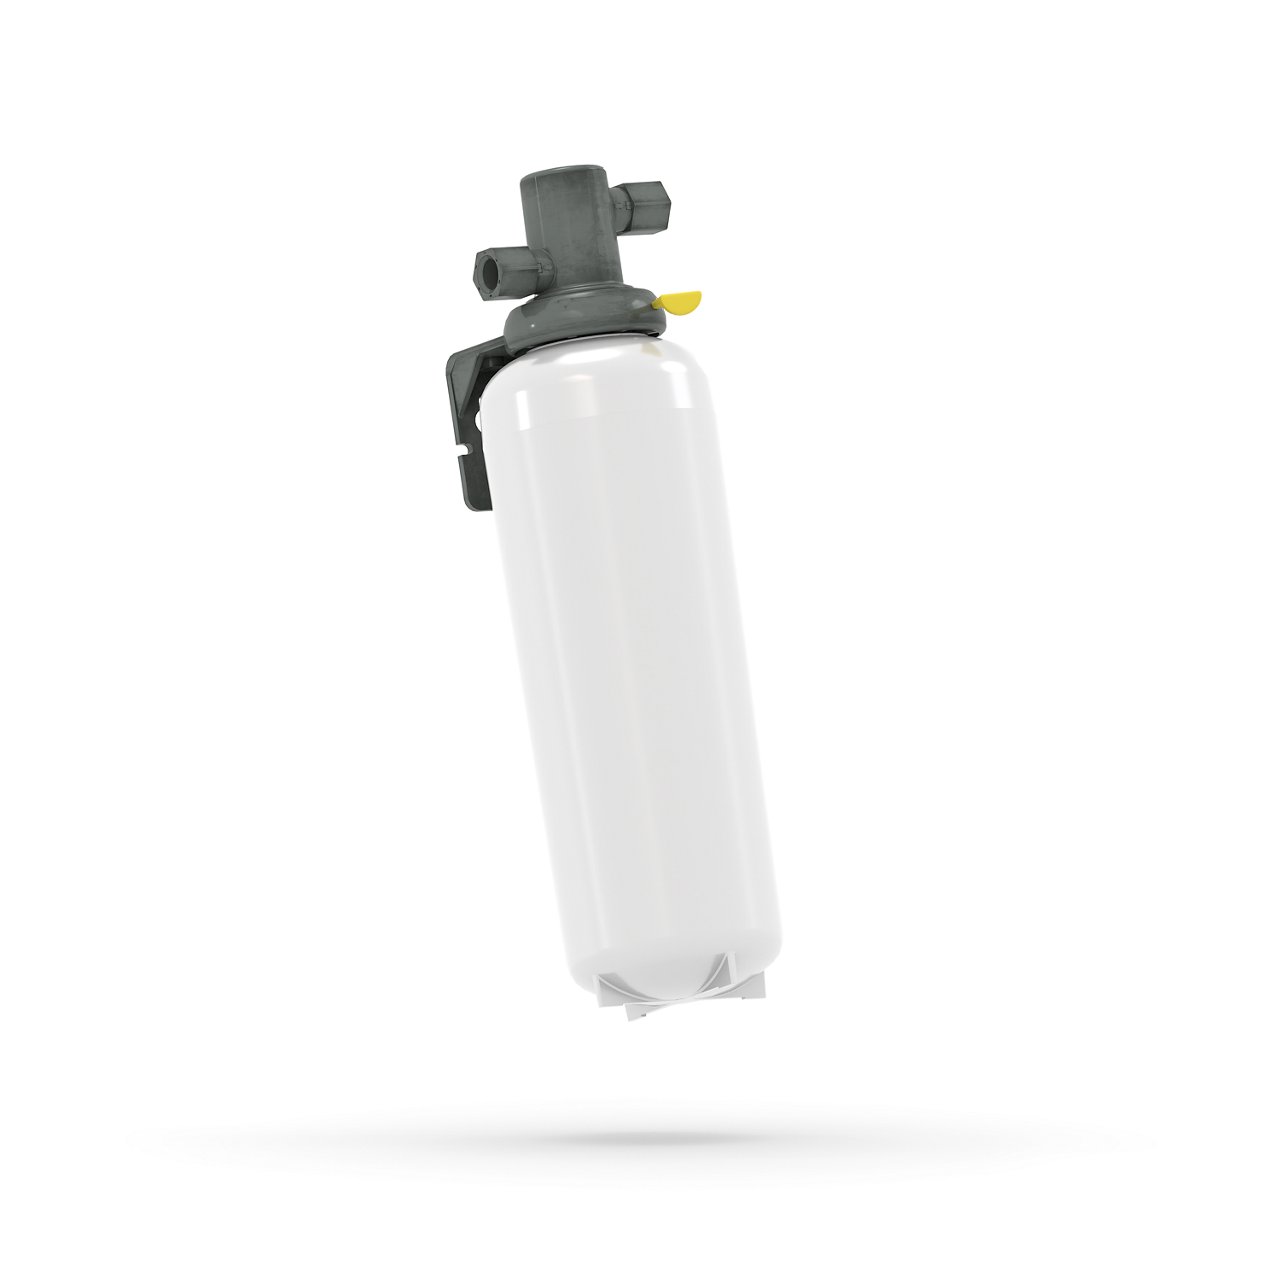 Rendered image of the 3M High Flow CLX Series Water Filtration Systems from a 3/4 view